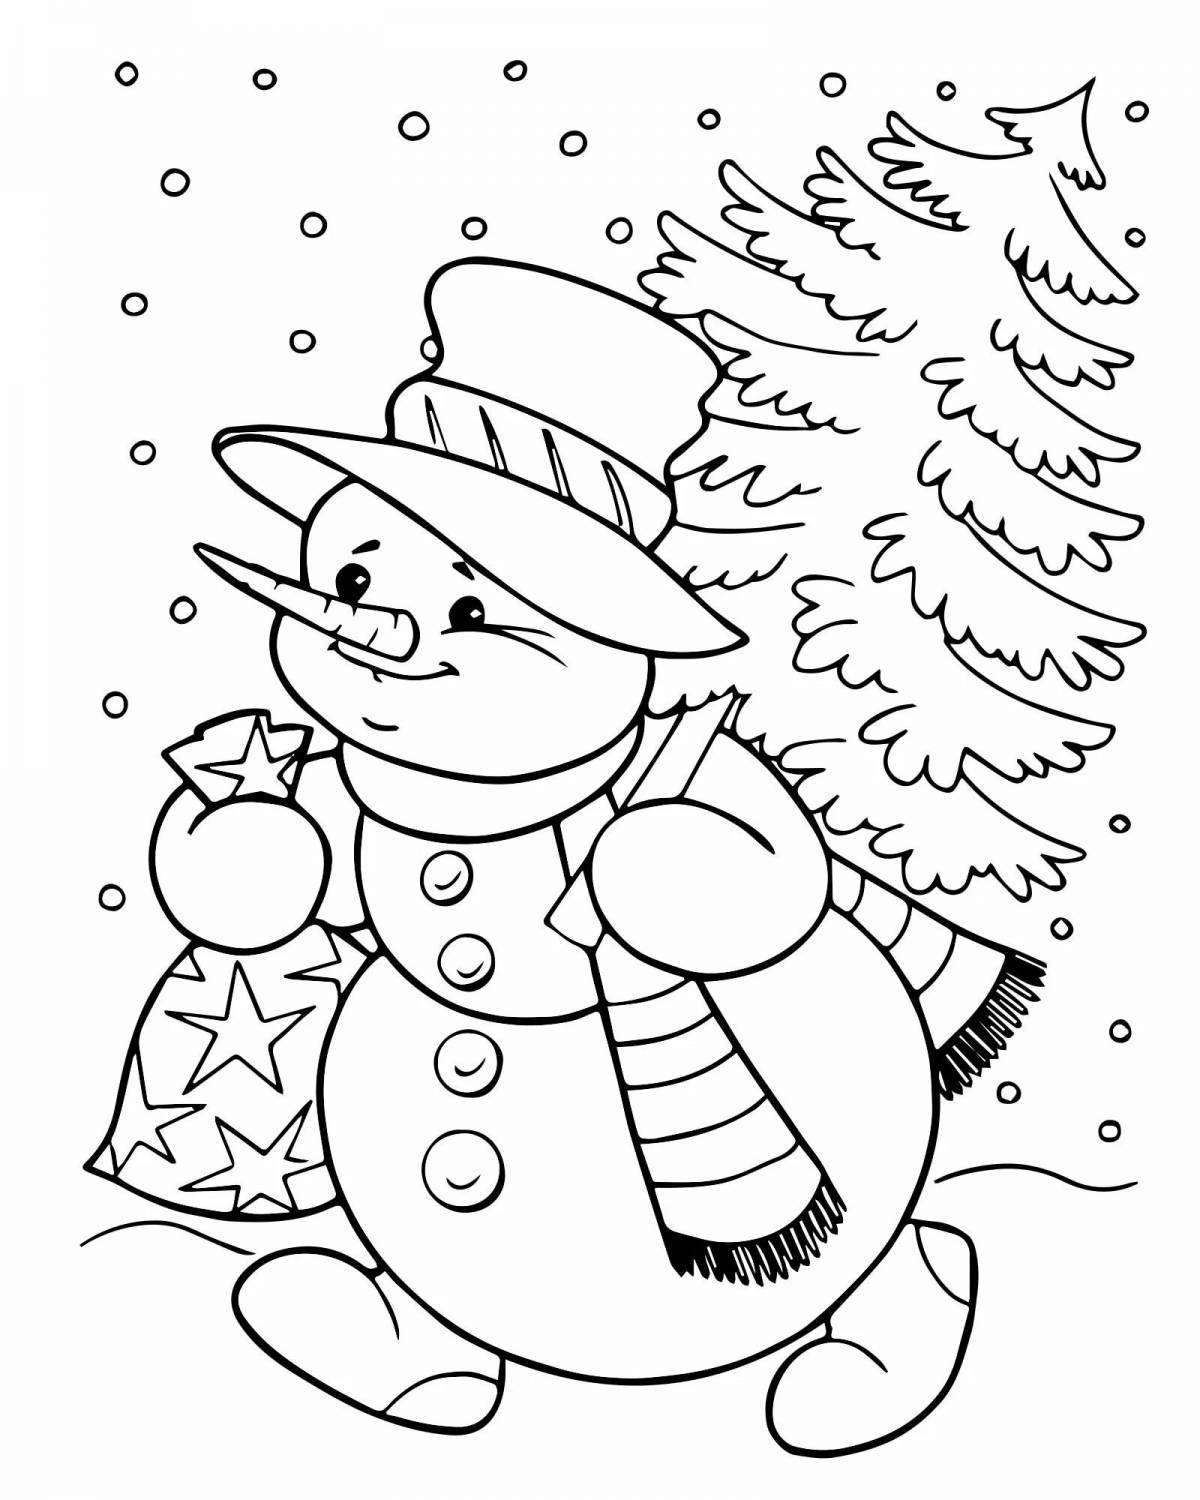 Glossy children's coloring snowman